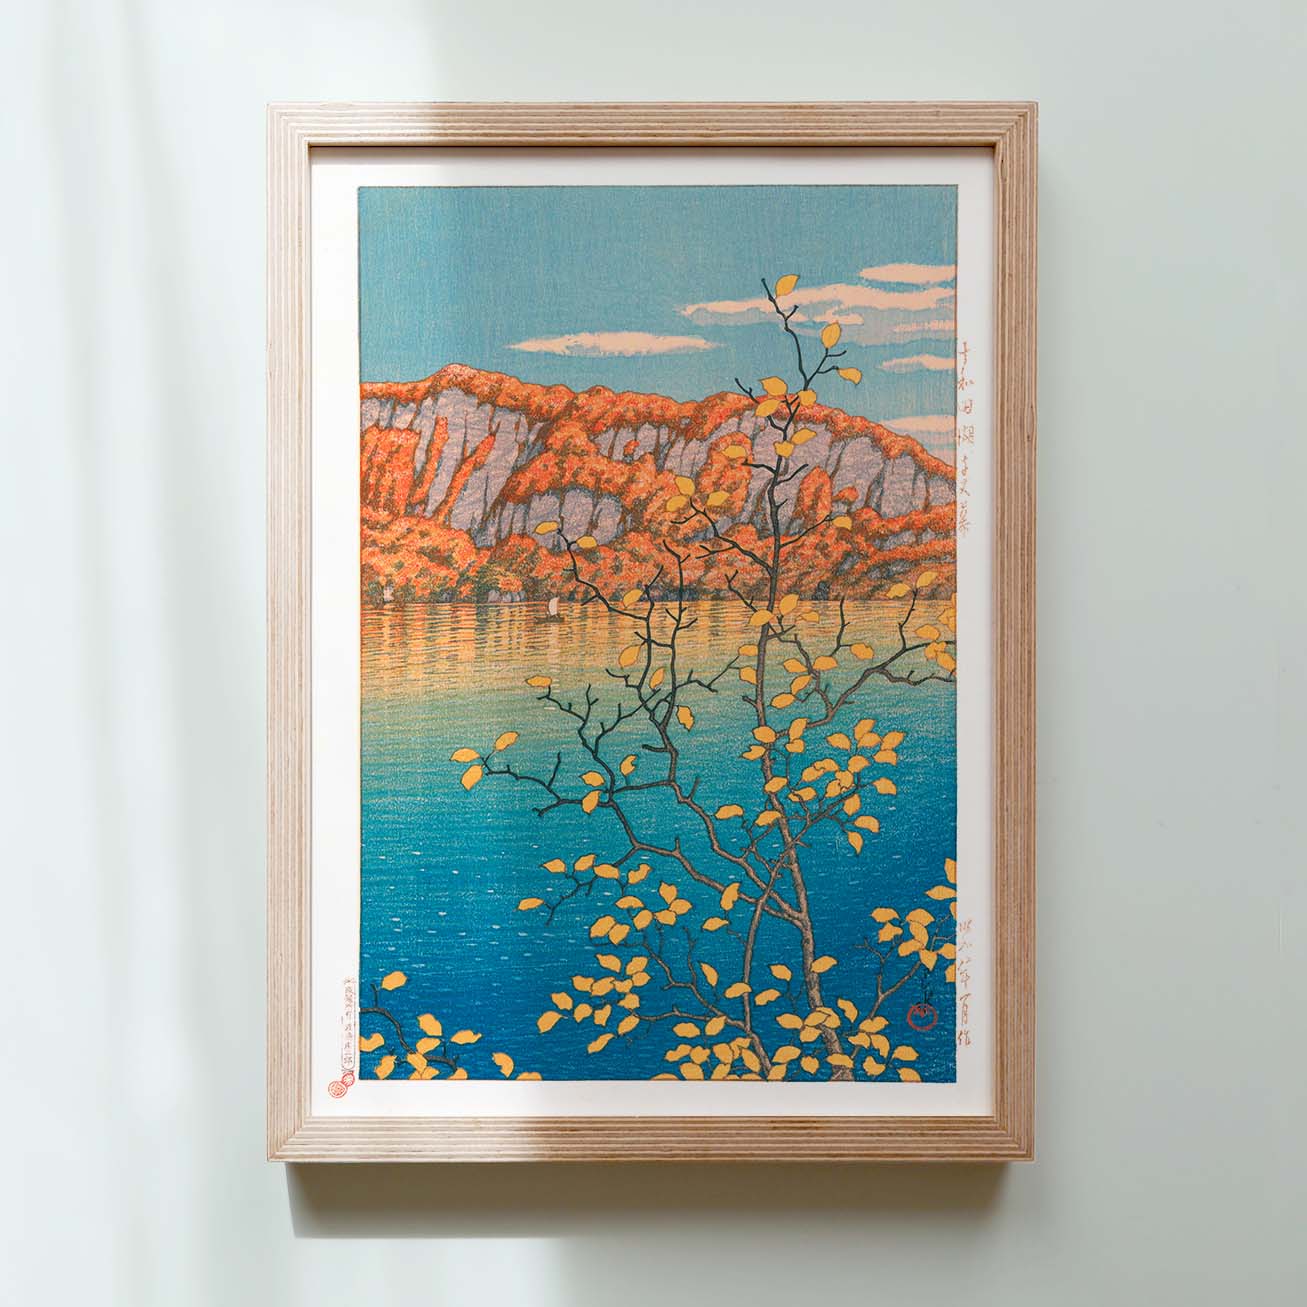 Framed Japanese Art Poster by Kawase Hasui featuring a mountain, lake, and Autumn Leaves 